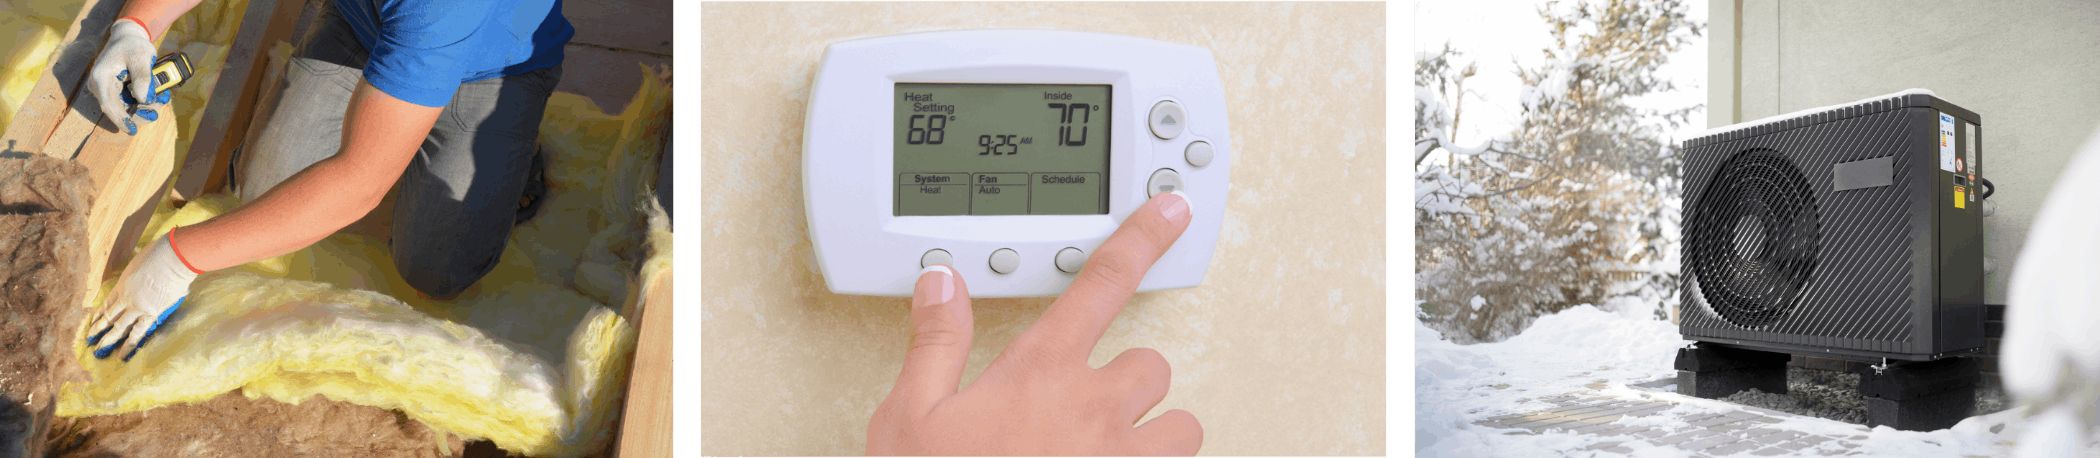 Three photos demonstrating energy efficiency techniques including insulation, programable thermostat, and air conditioner